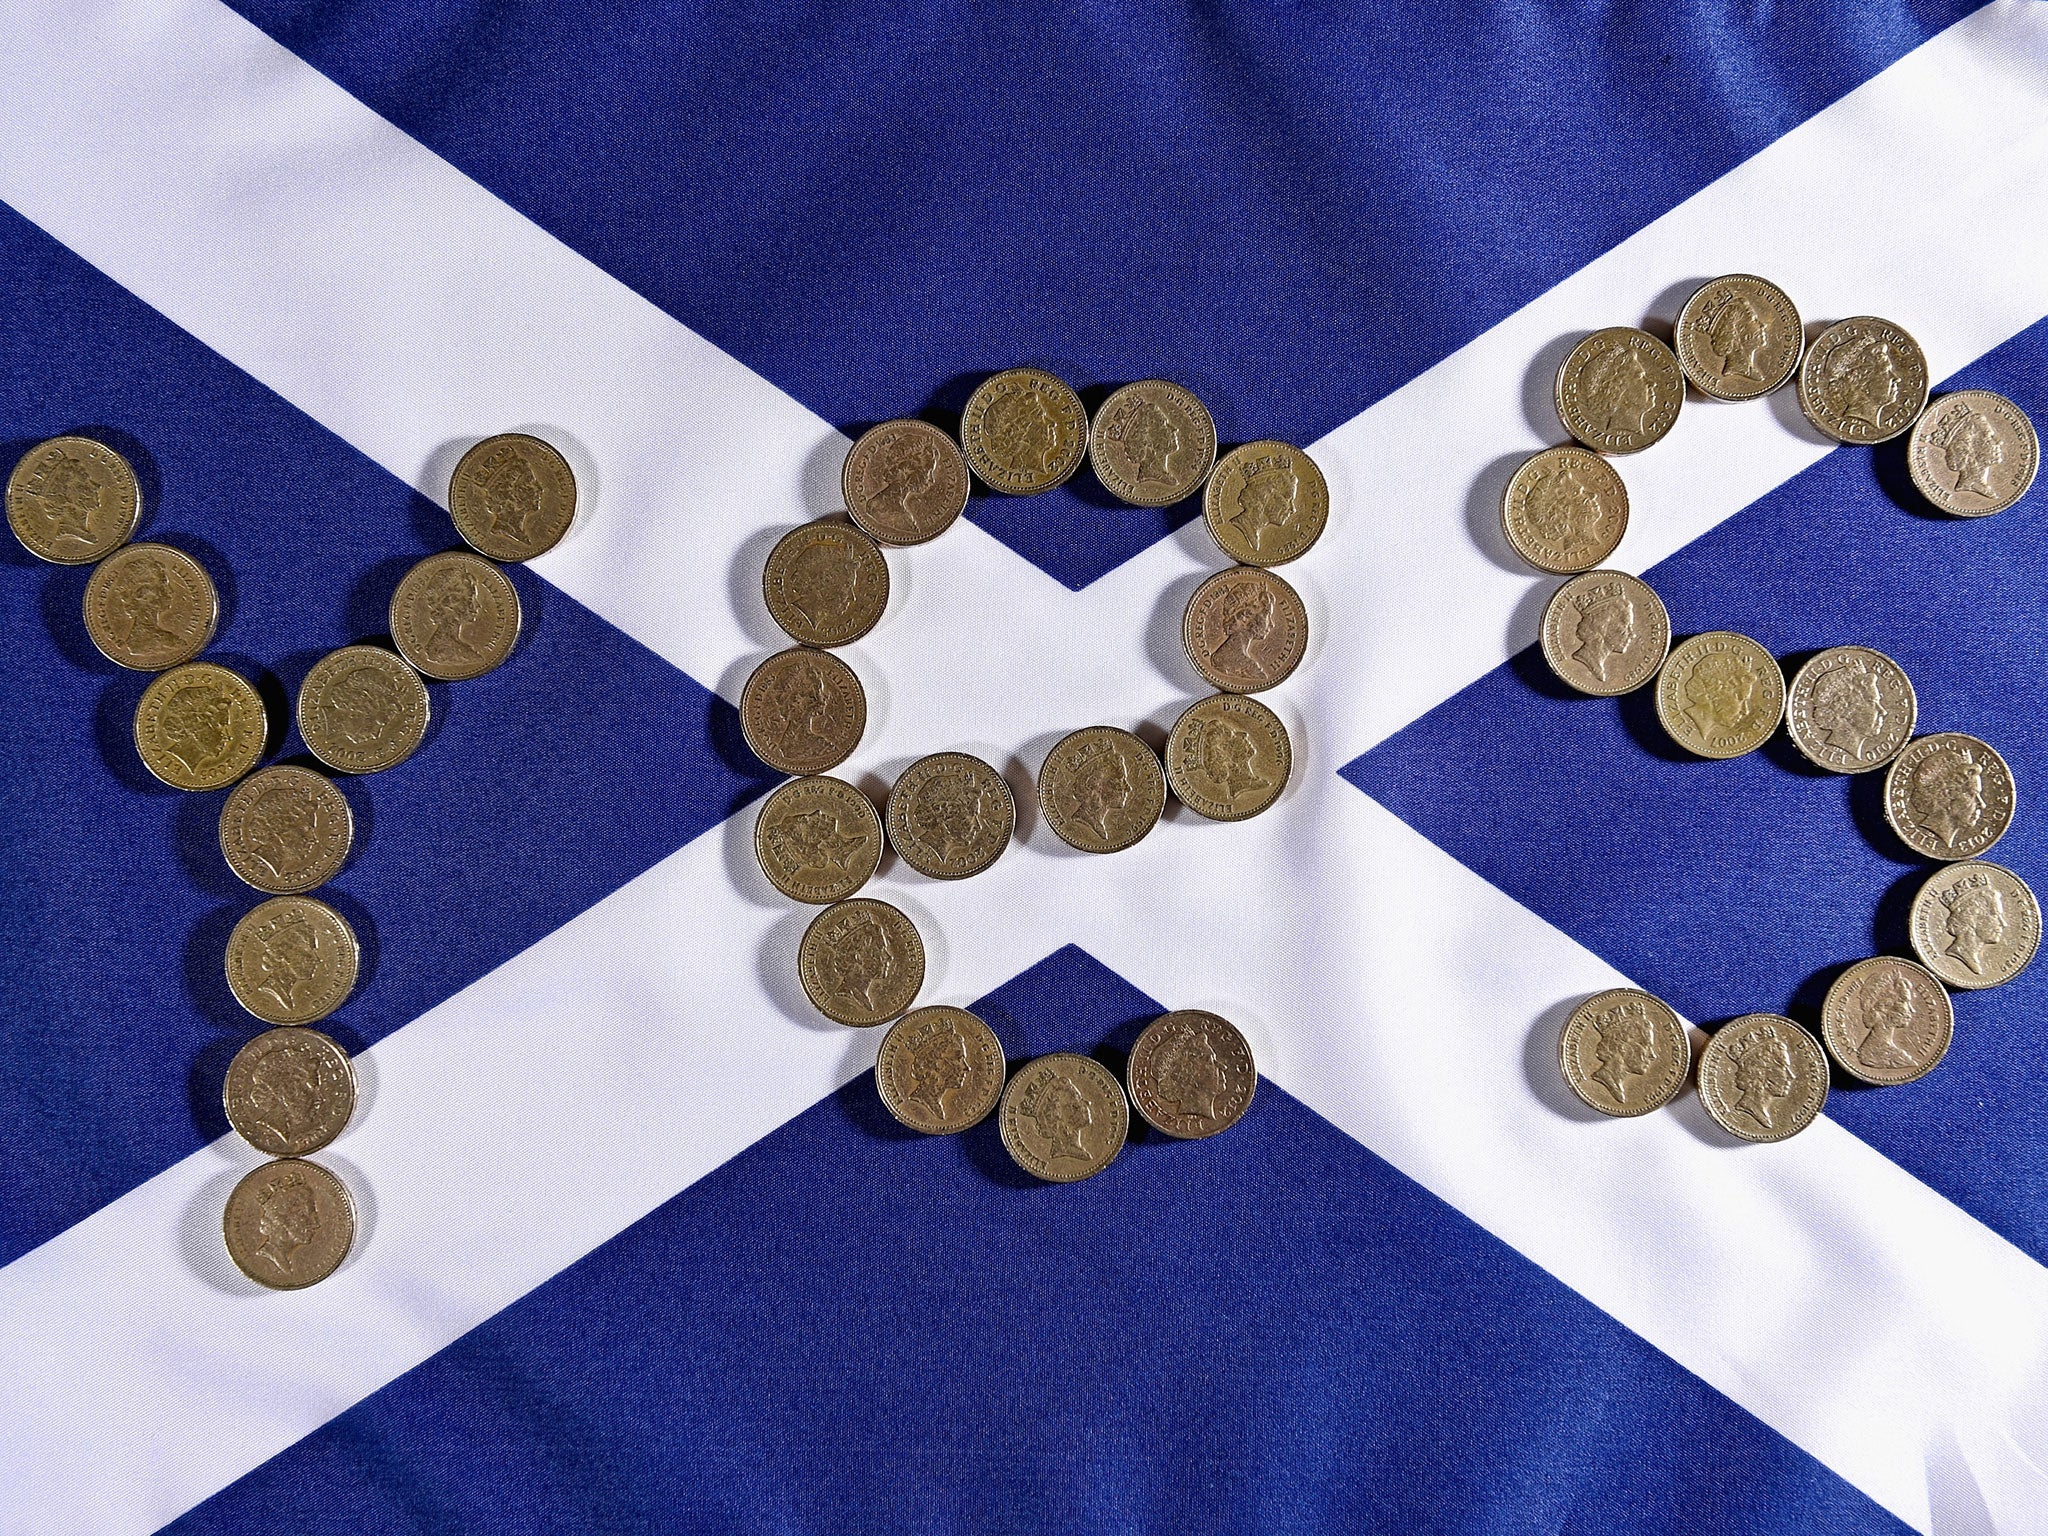 The Yes side don’t believe Scotland will lose the pound